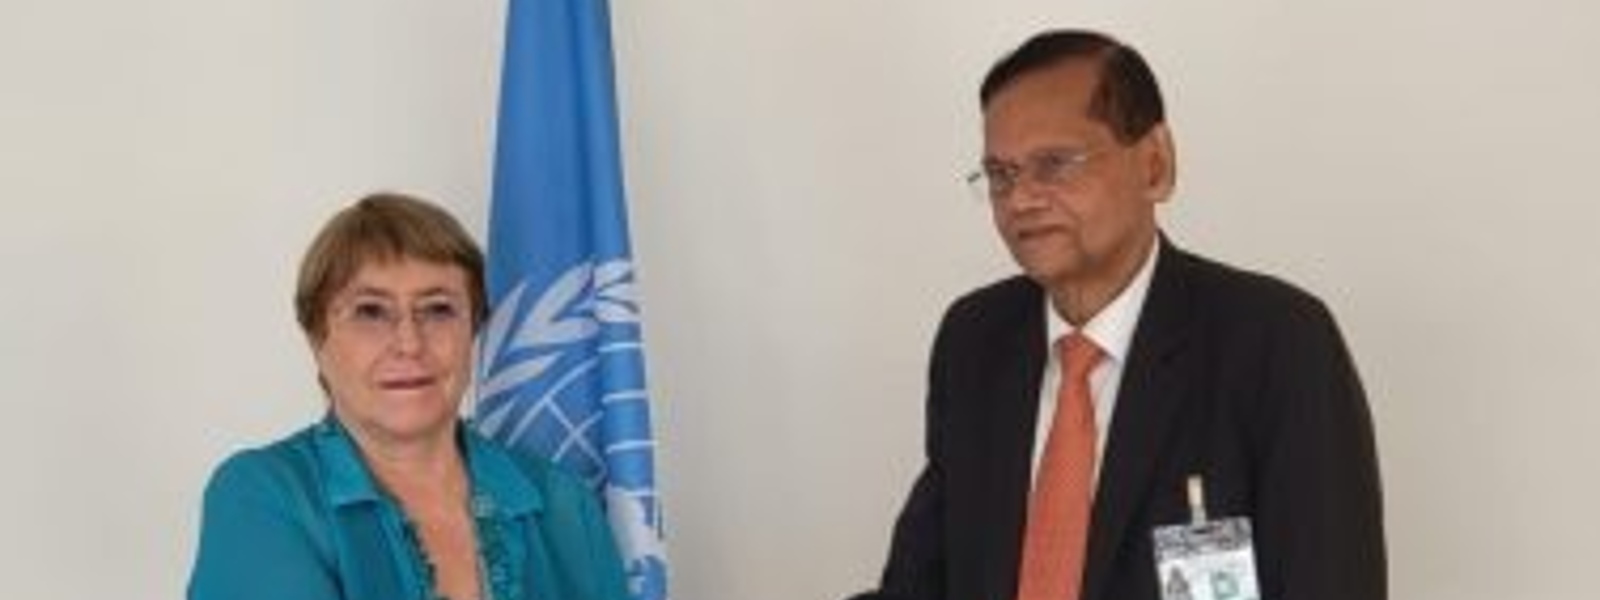 Foreign Minister meets UN Human Rights High Commissioner